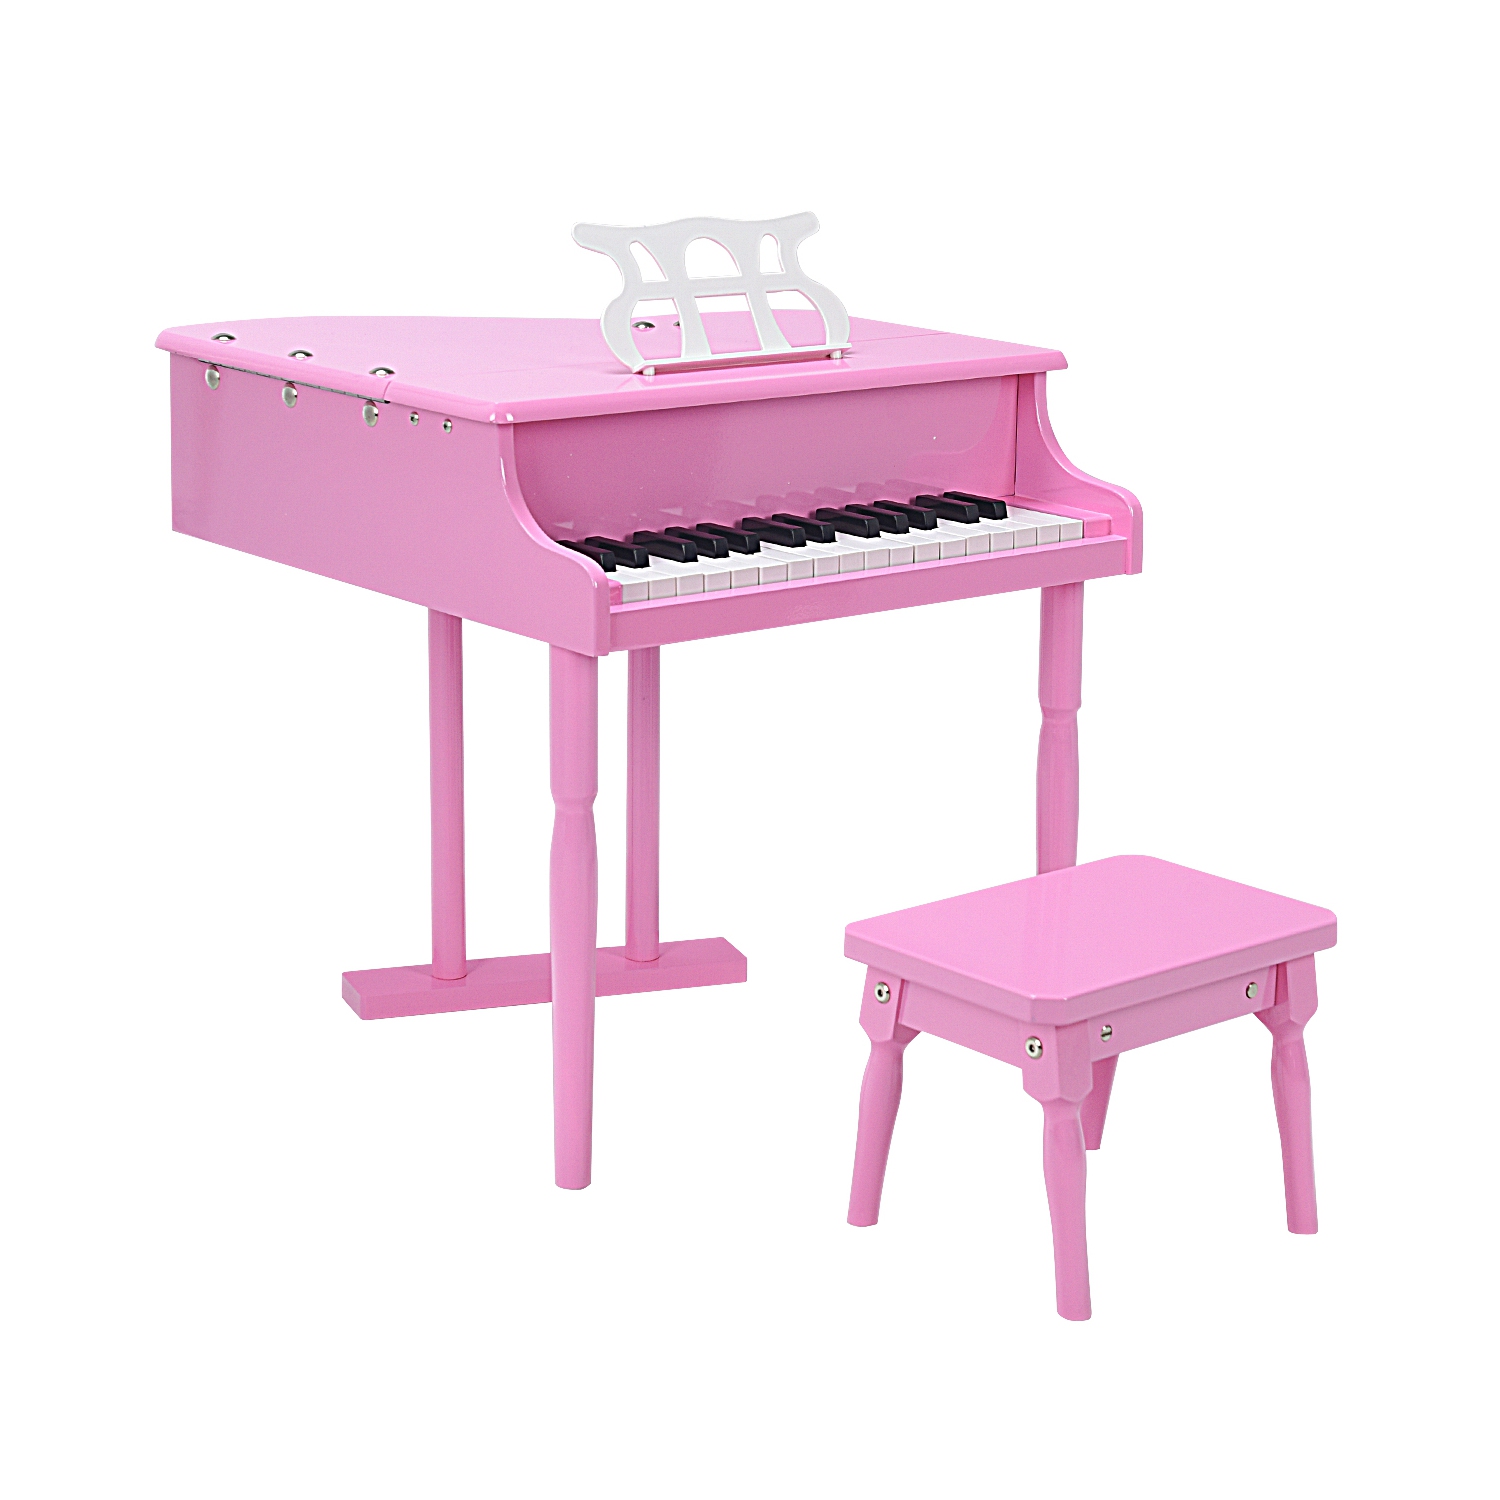 Classical Kids Piano 30 Keys Wood Toy Mini Grand Piano with Bench Pink/Black